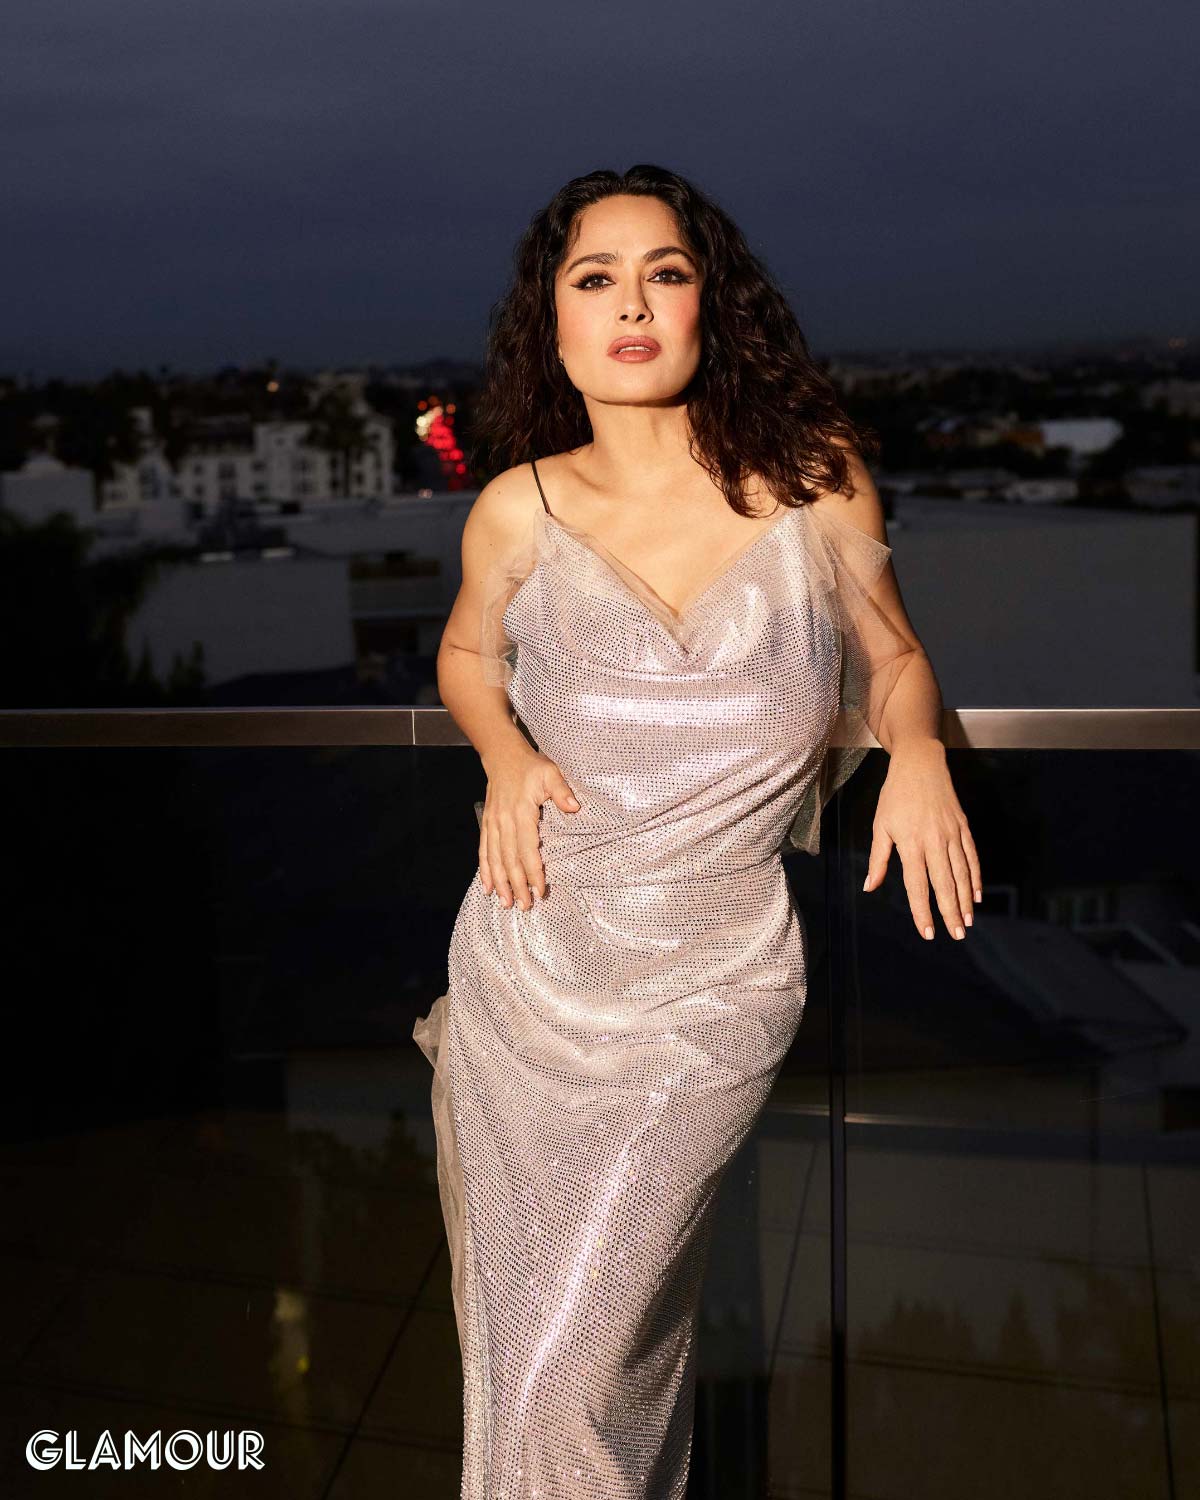 Salma Hayek says 'I didn't marry for money' as she admits surprising reason  she wed, Celebrity News, Showbiz & TV